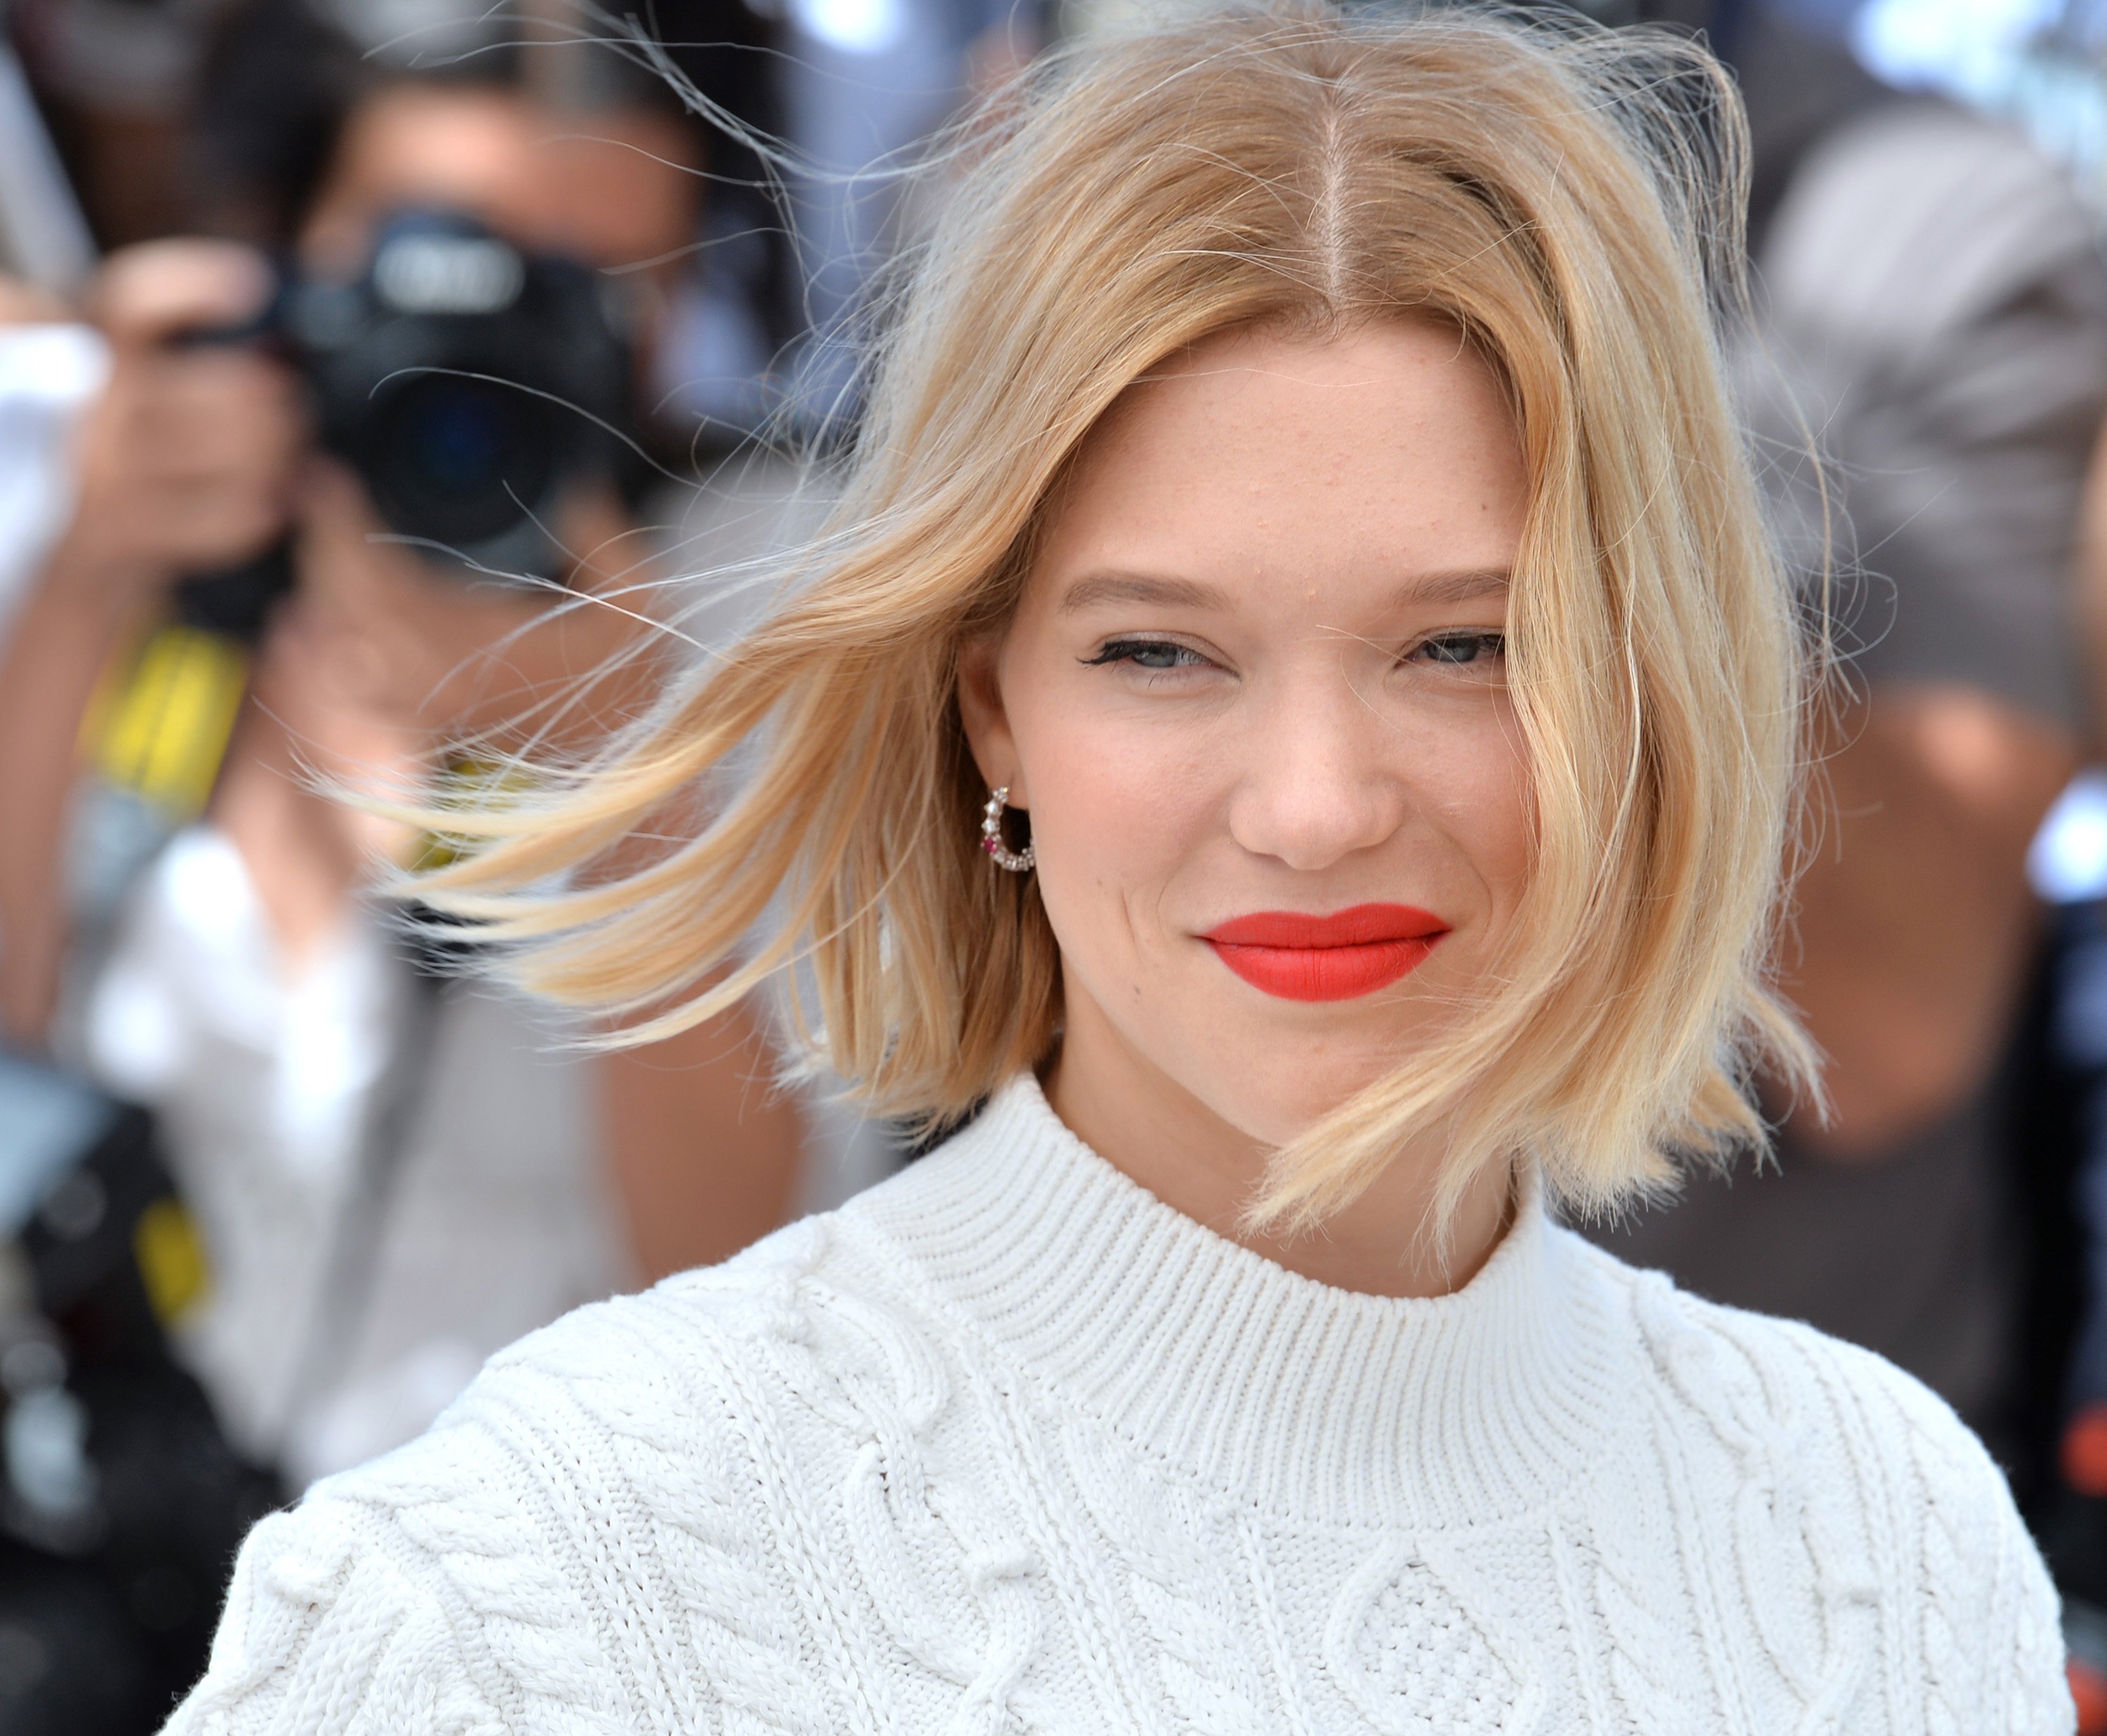 CANNES, FRANCE - MAY 19: Lea Seydoux attends the 'It's Only The End Of The World (Juste La Fin Du Monde)' Photocall during the 69th annual Cannes Film Festival at the Palais des Festivals on May 19, 2016 in Cannes, France. (Photo by Anthony Harvey/FilmMagic)